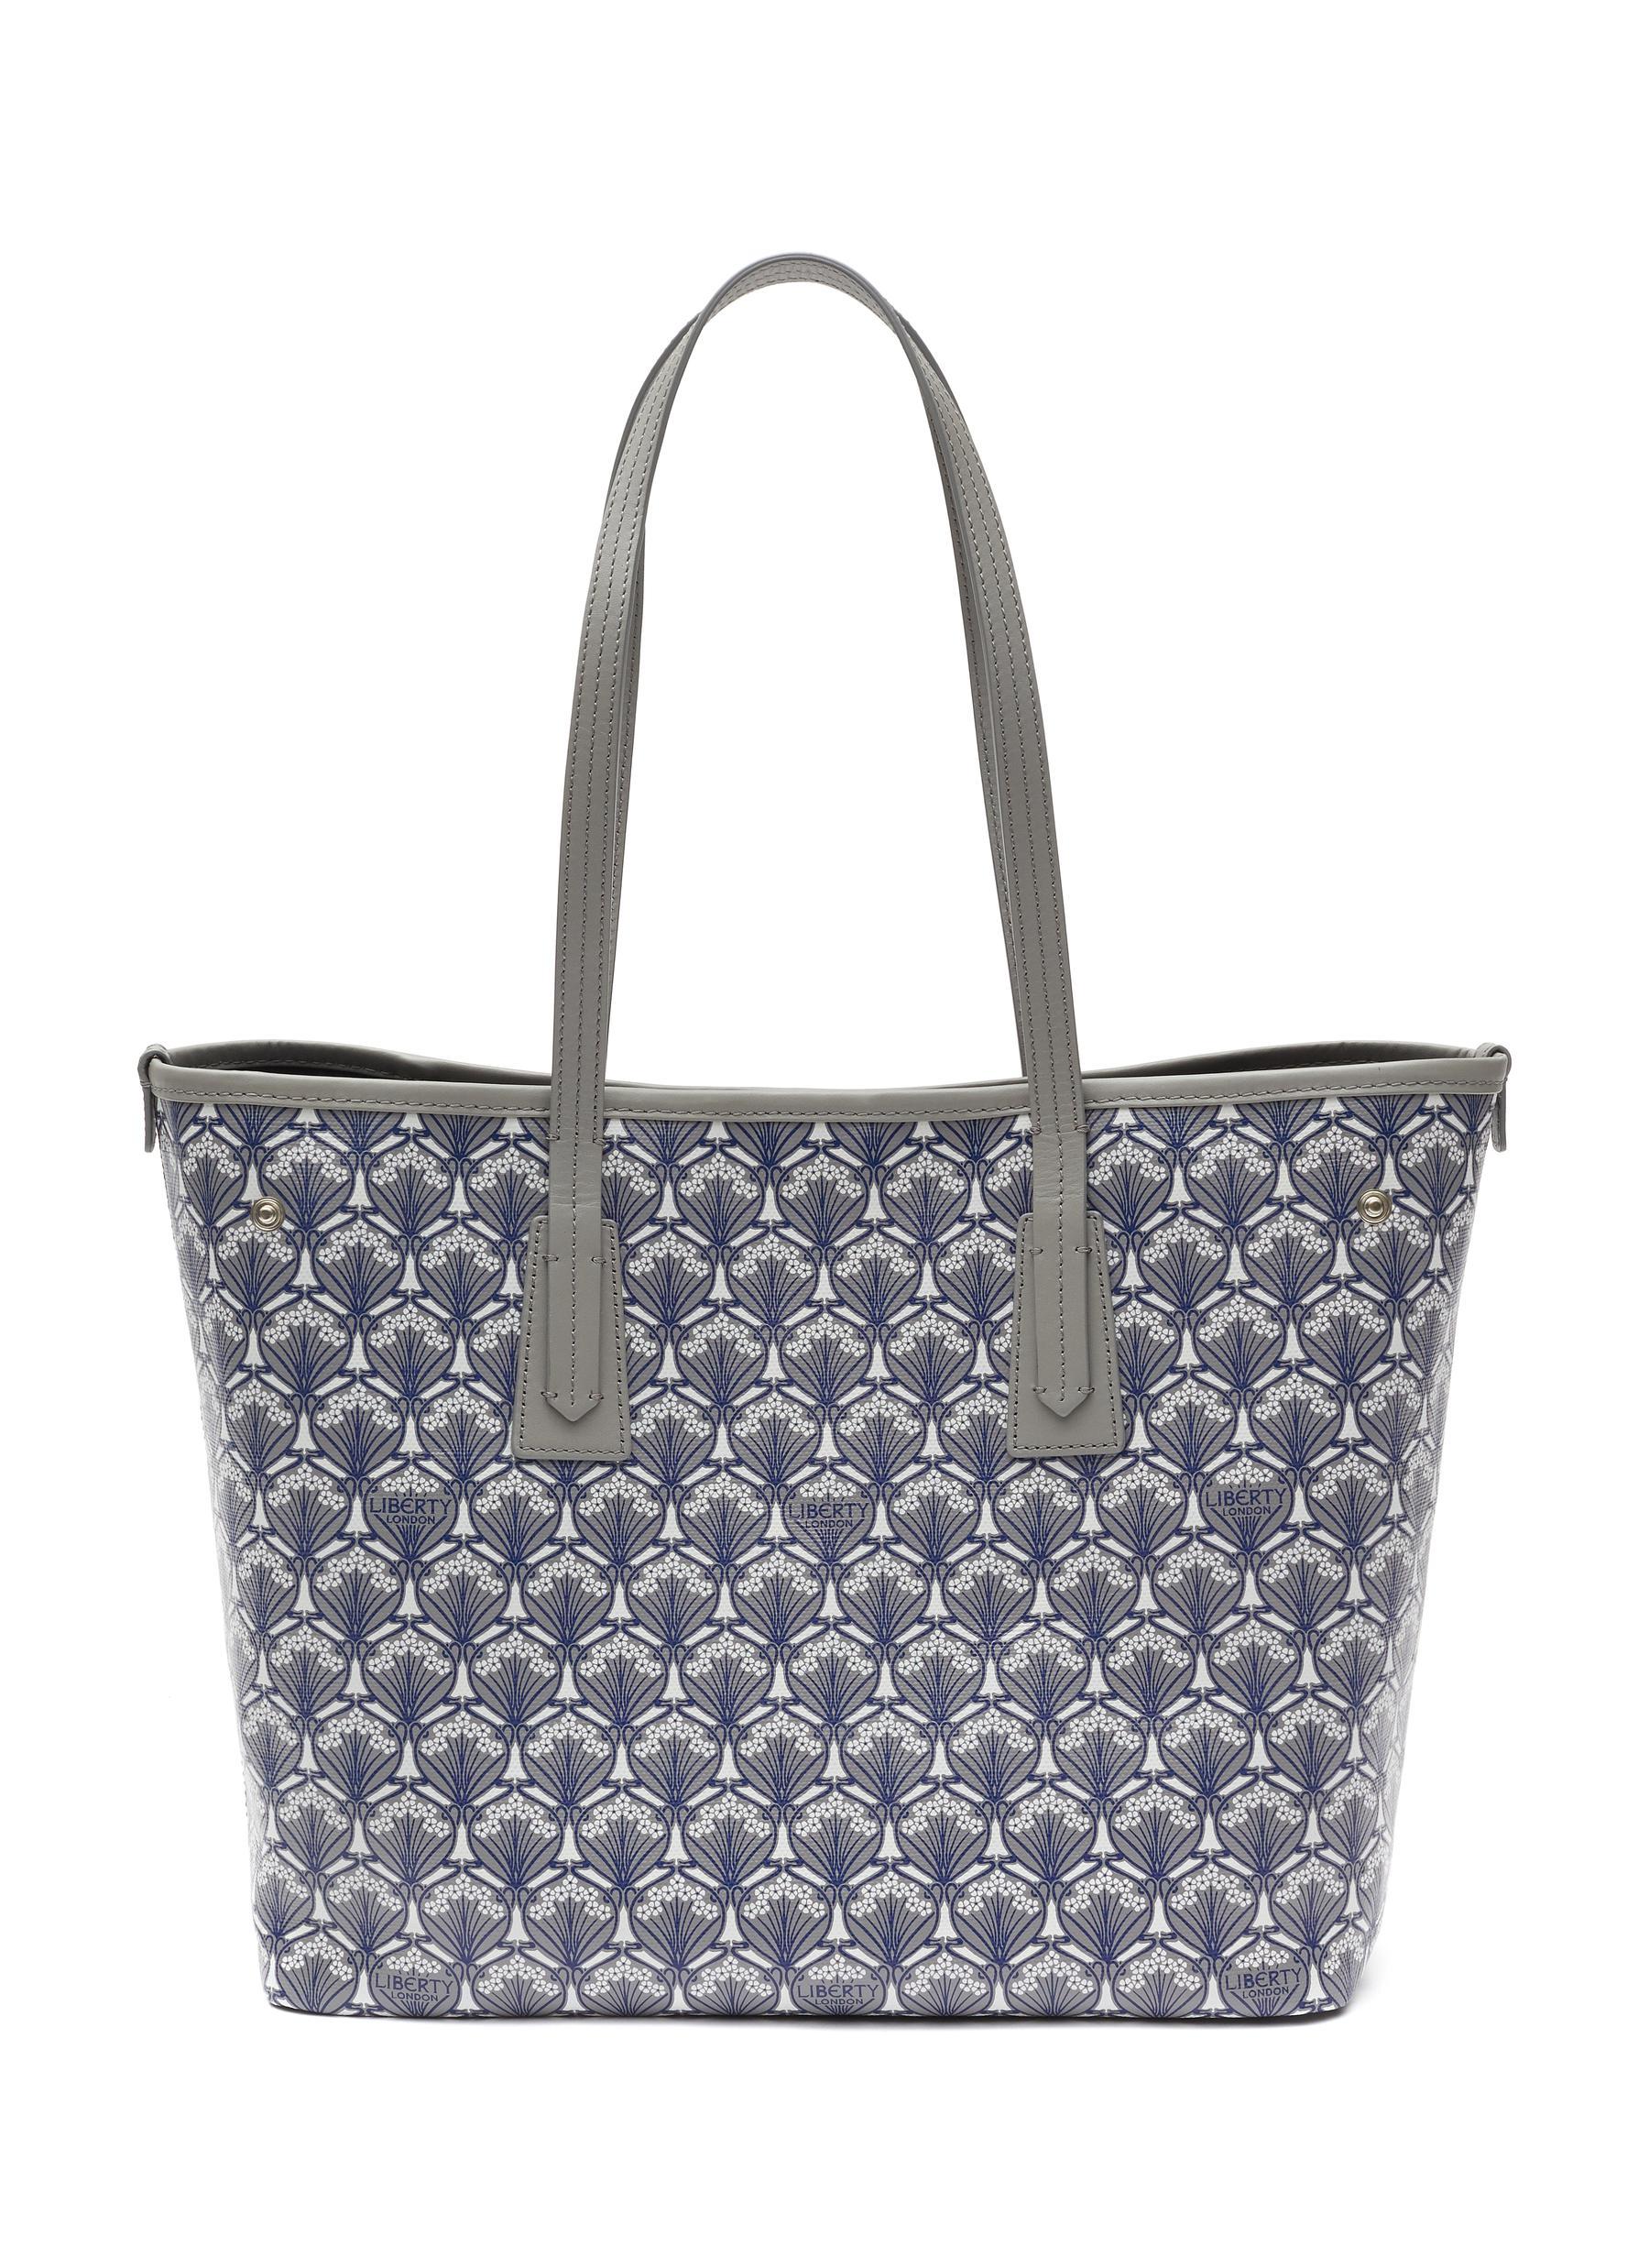 Liberty 'iphis Little Marlborough' Printed Canvas Tote Bag in Gray | Lyst